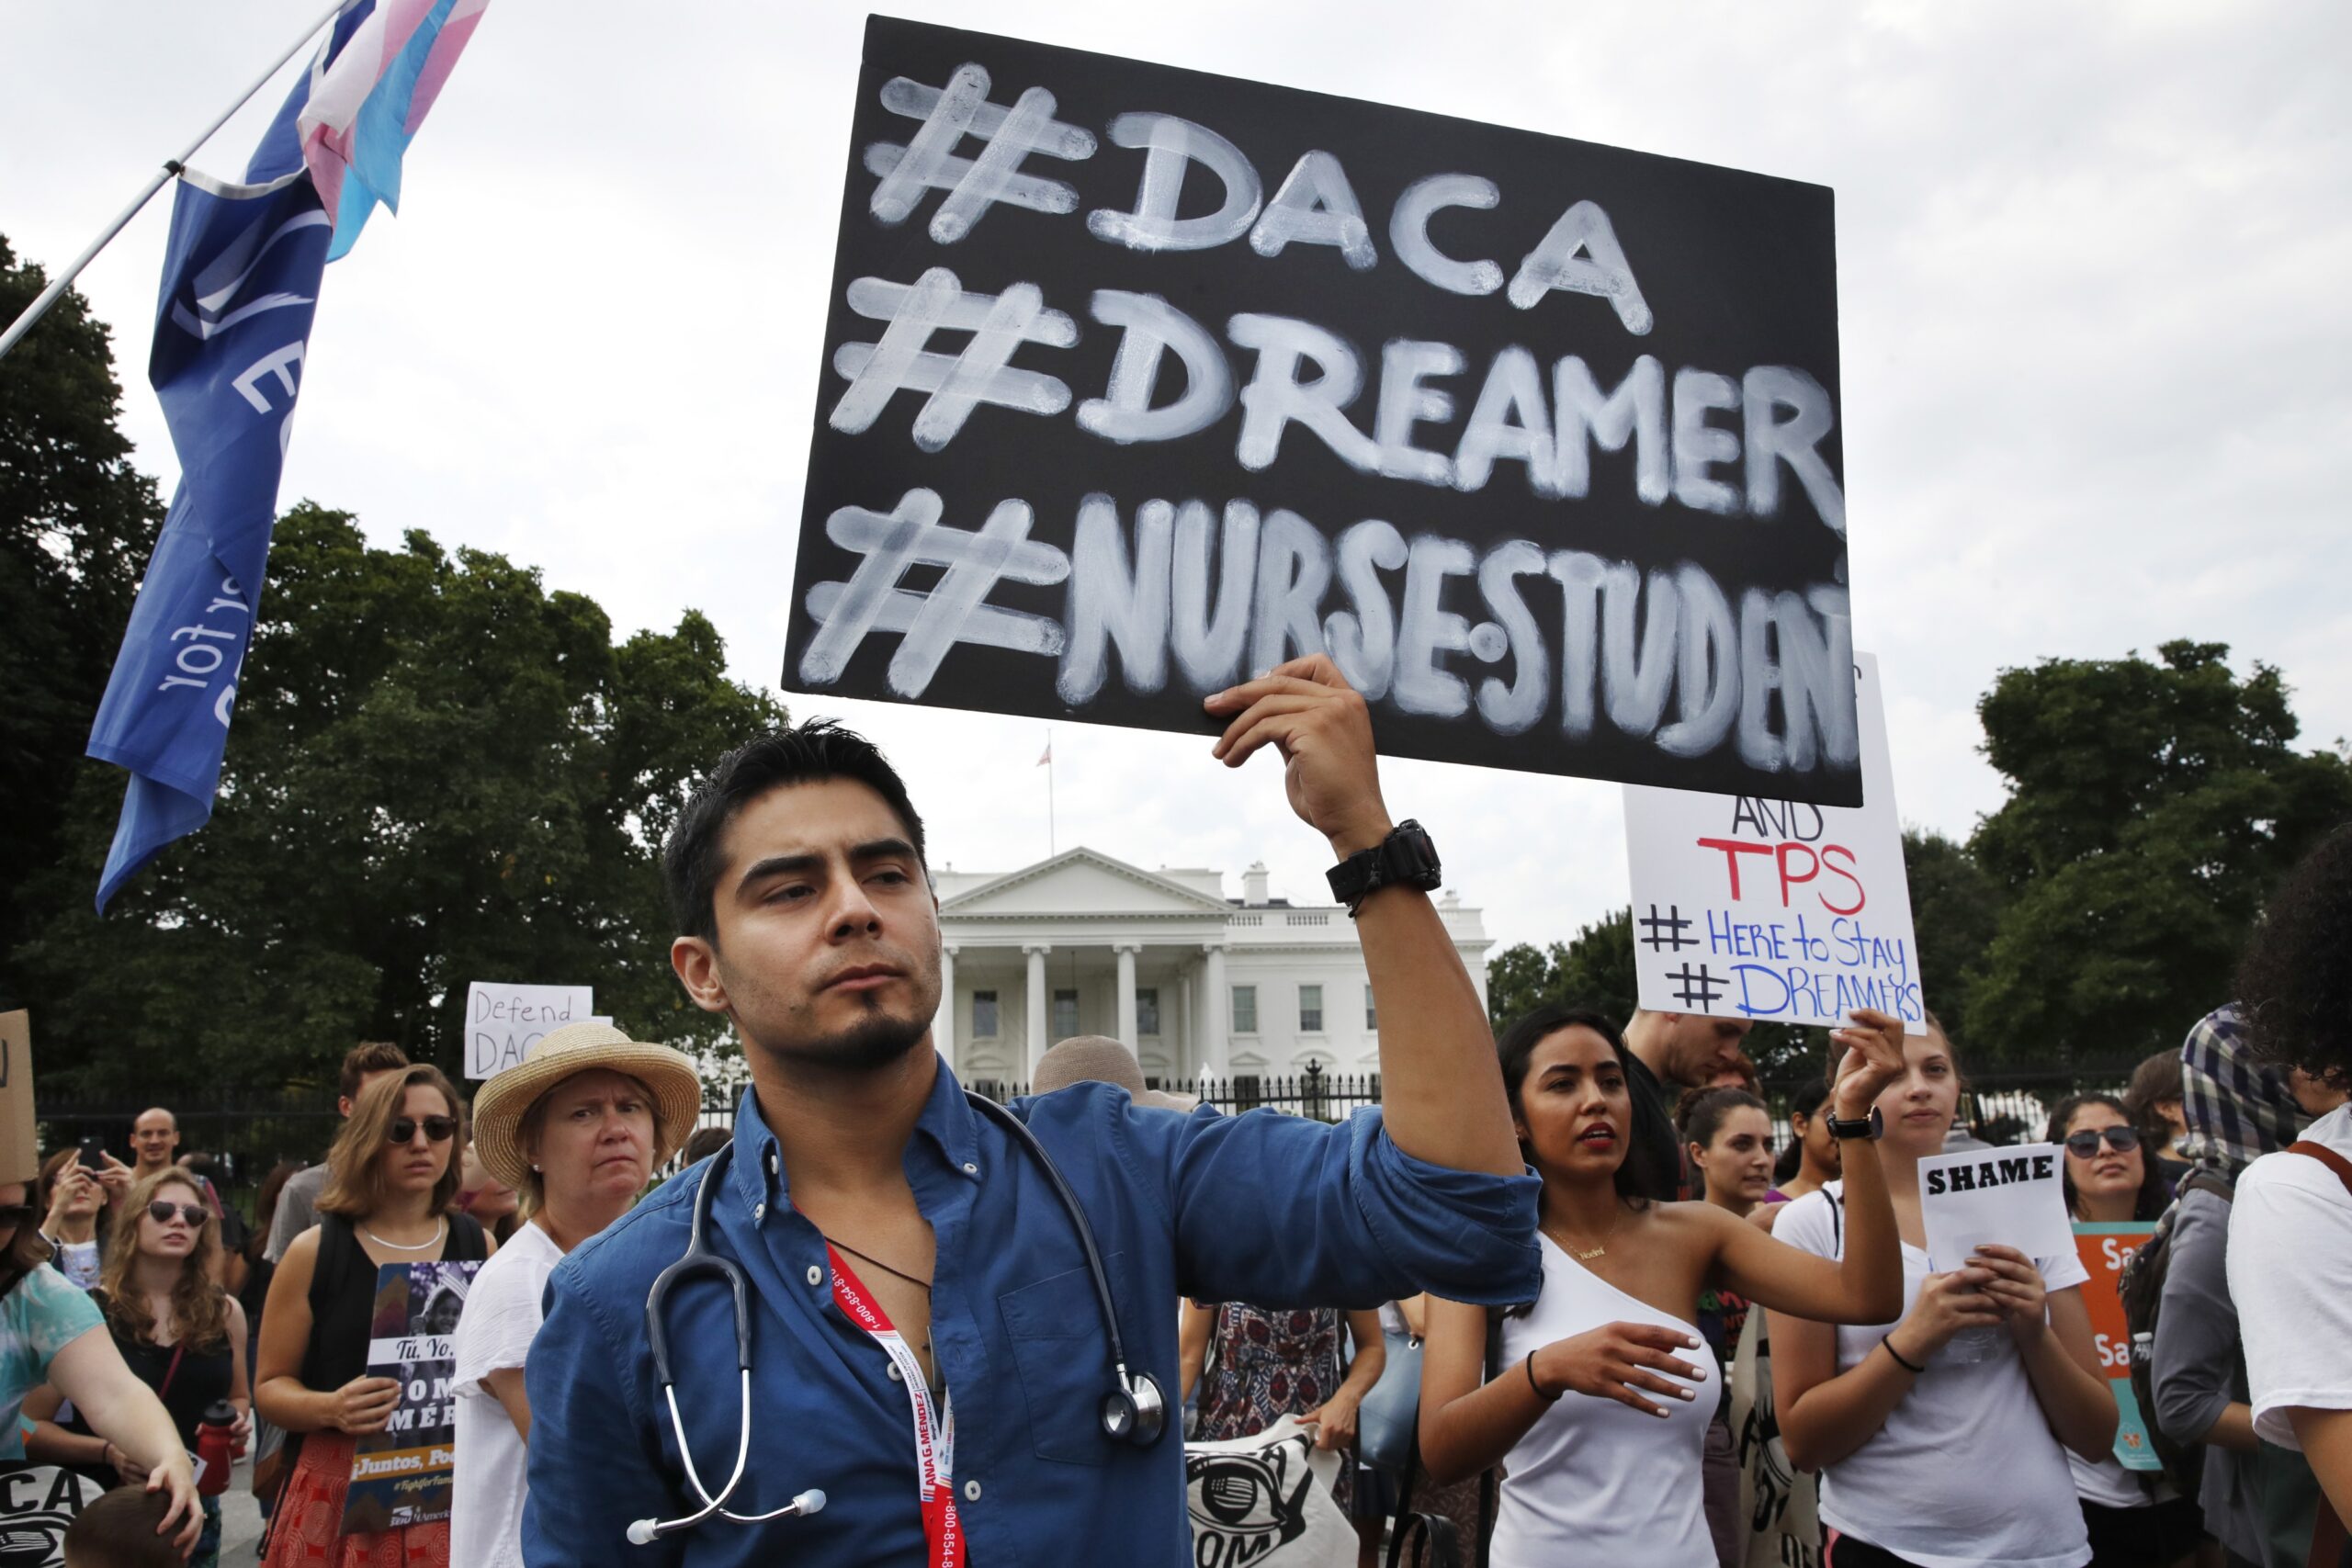 man holds up sign at a protest against depealing DACA